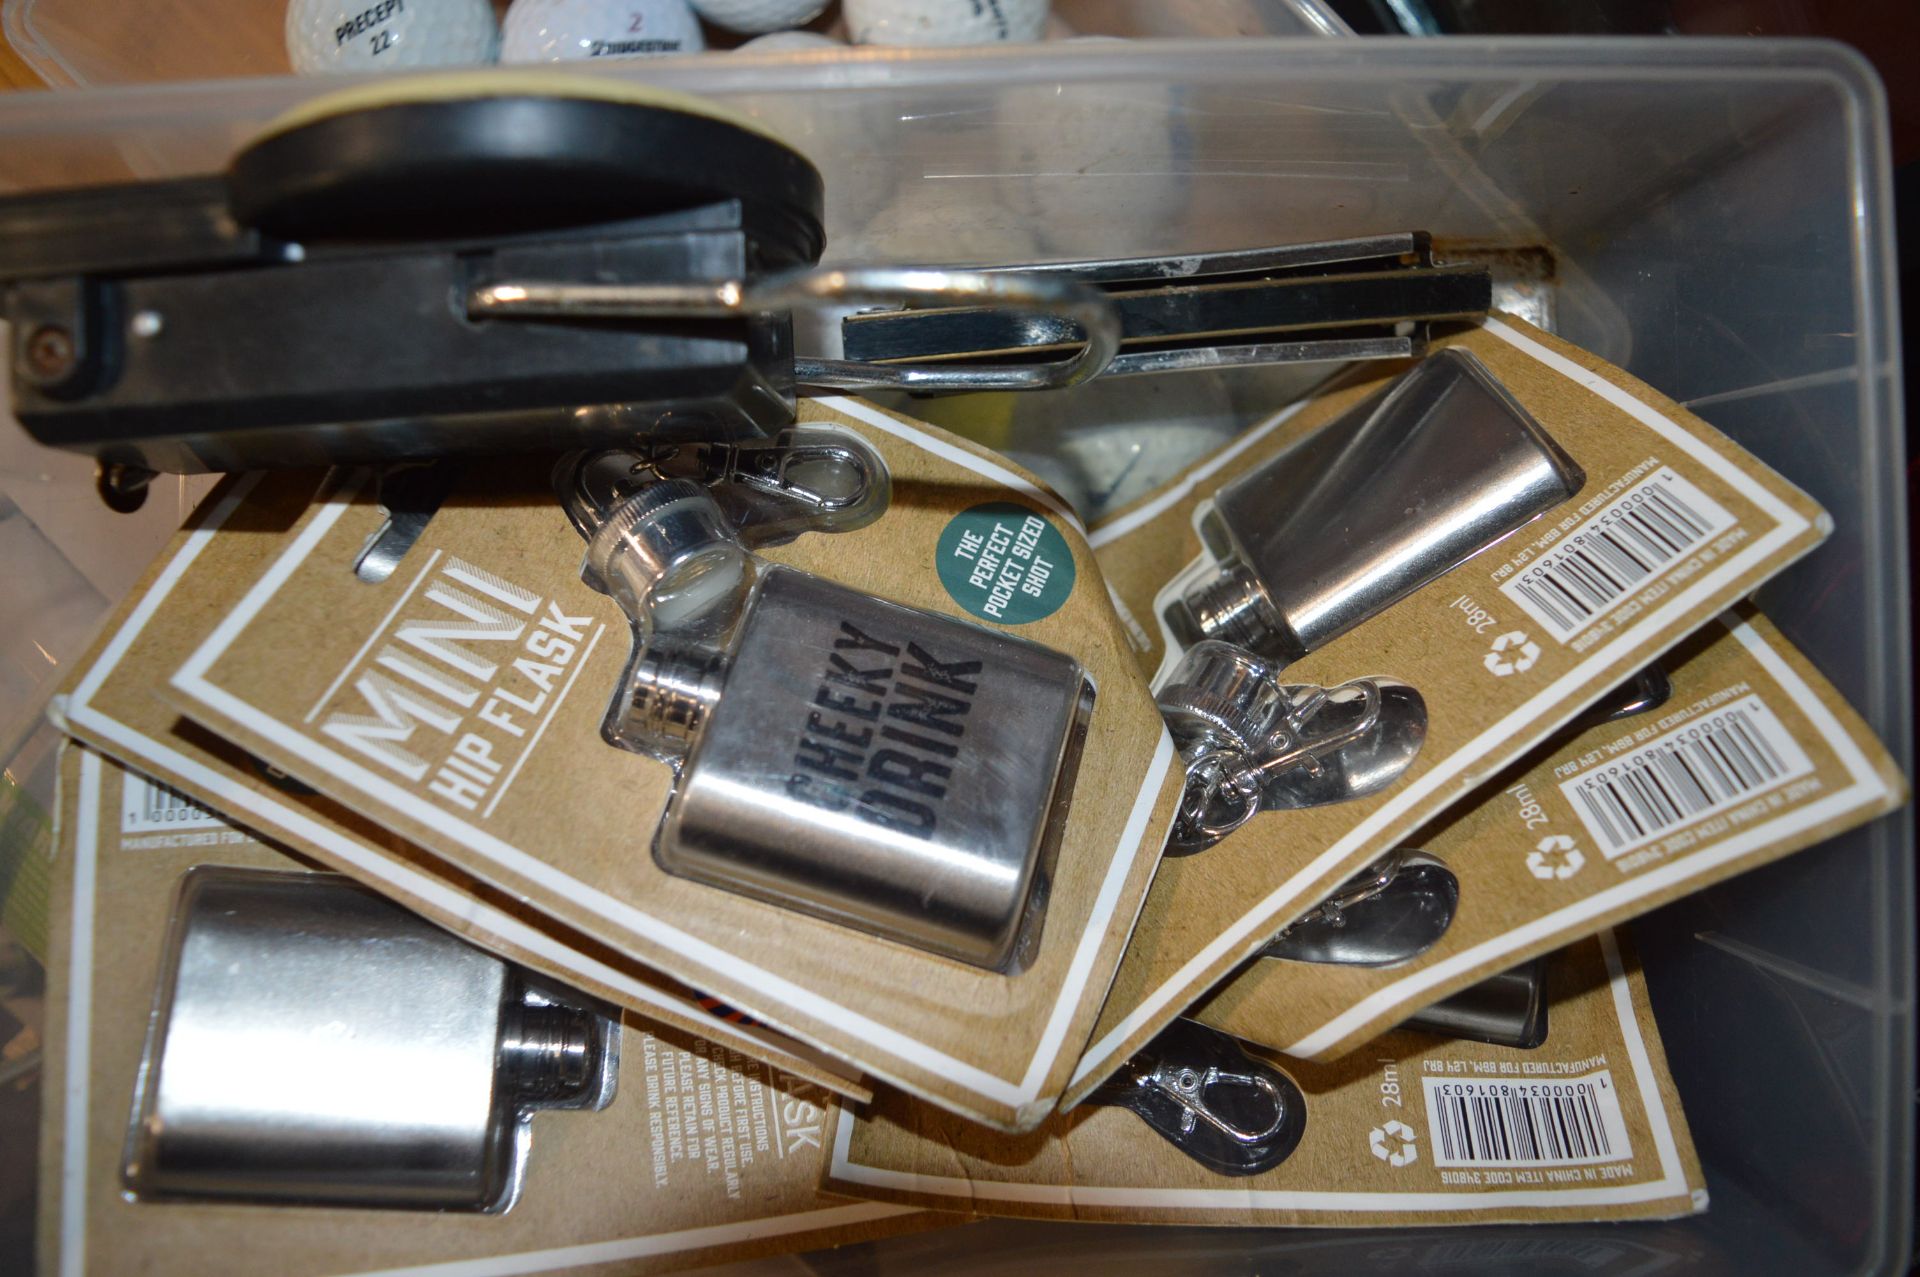 Contents of Shelf Including Spanners, Mini Hip Flasks, etc. - Image 3 of 4